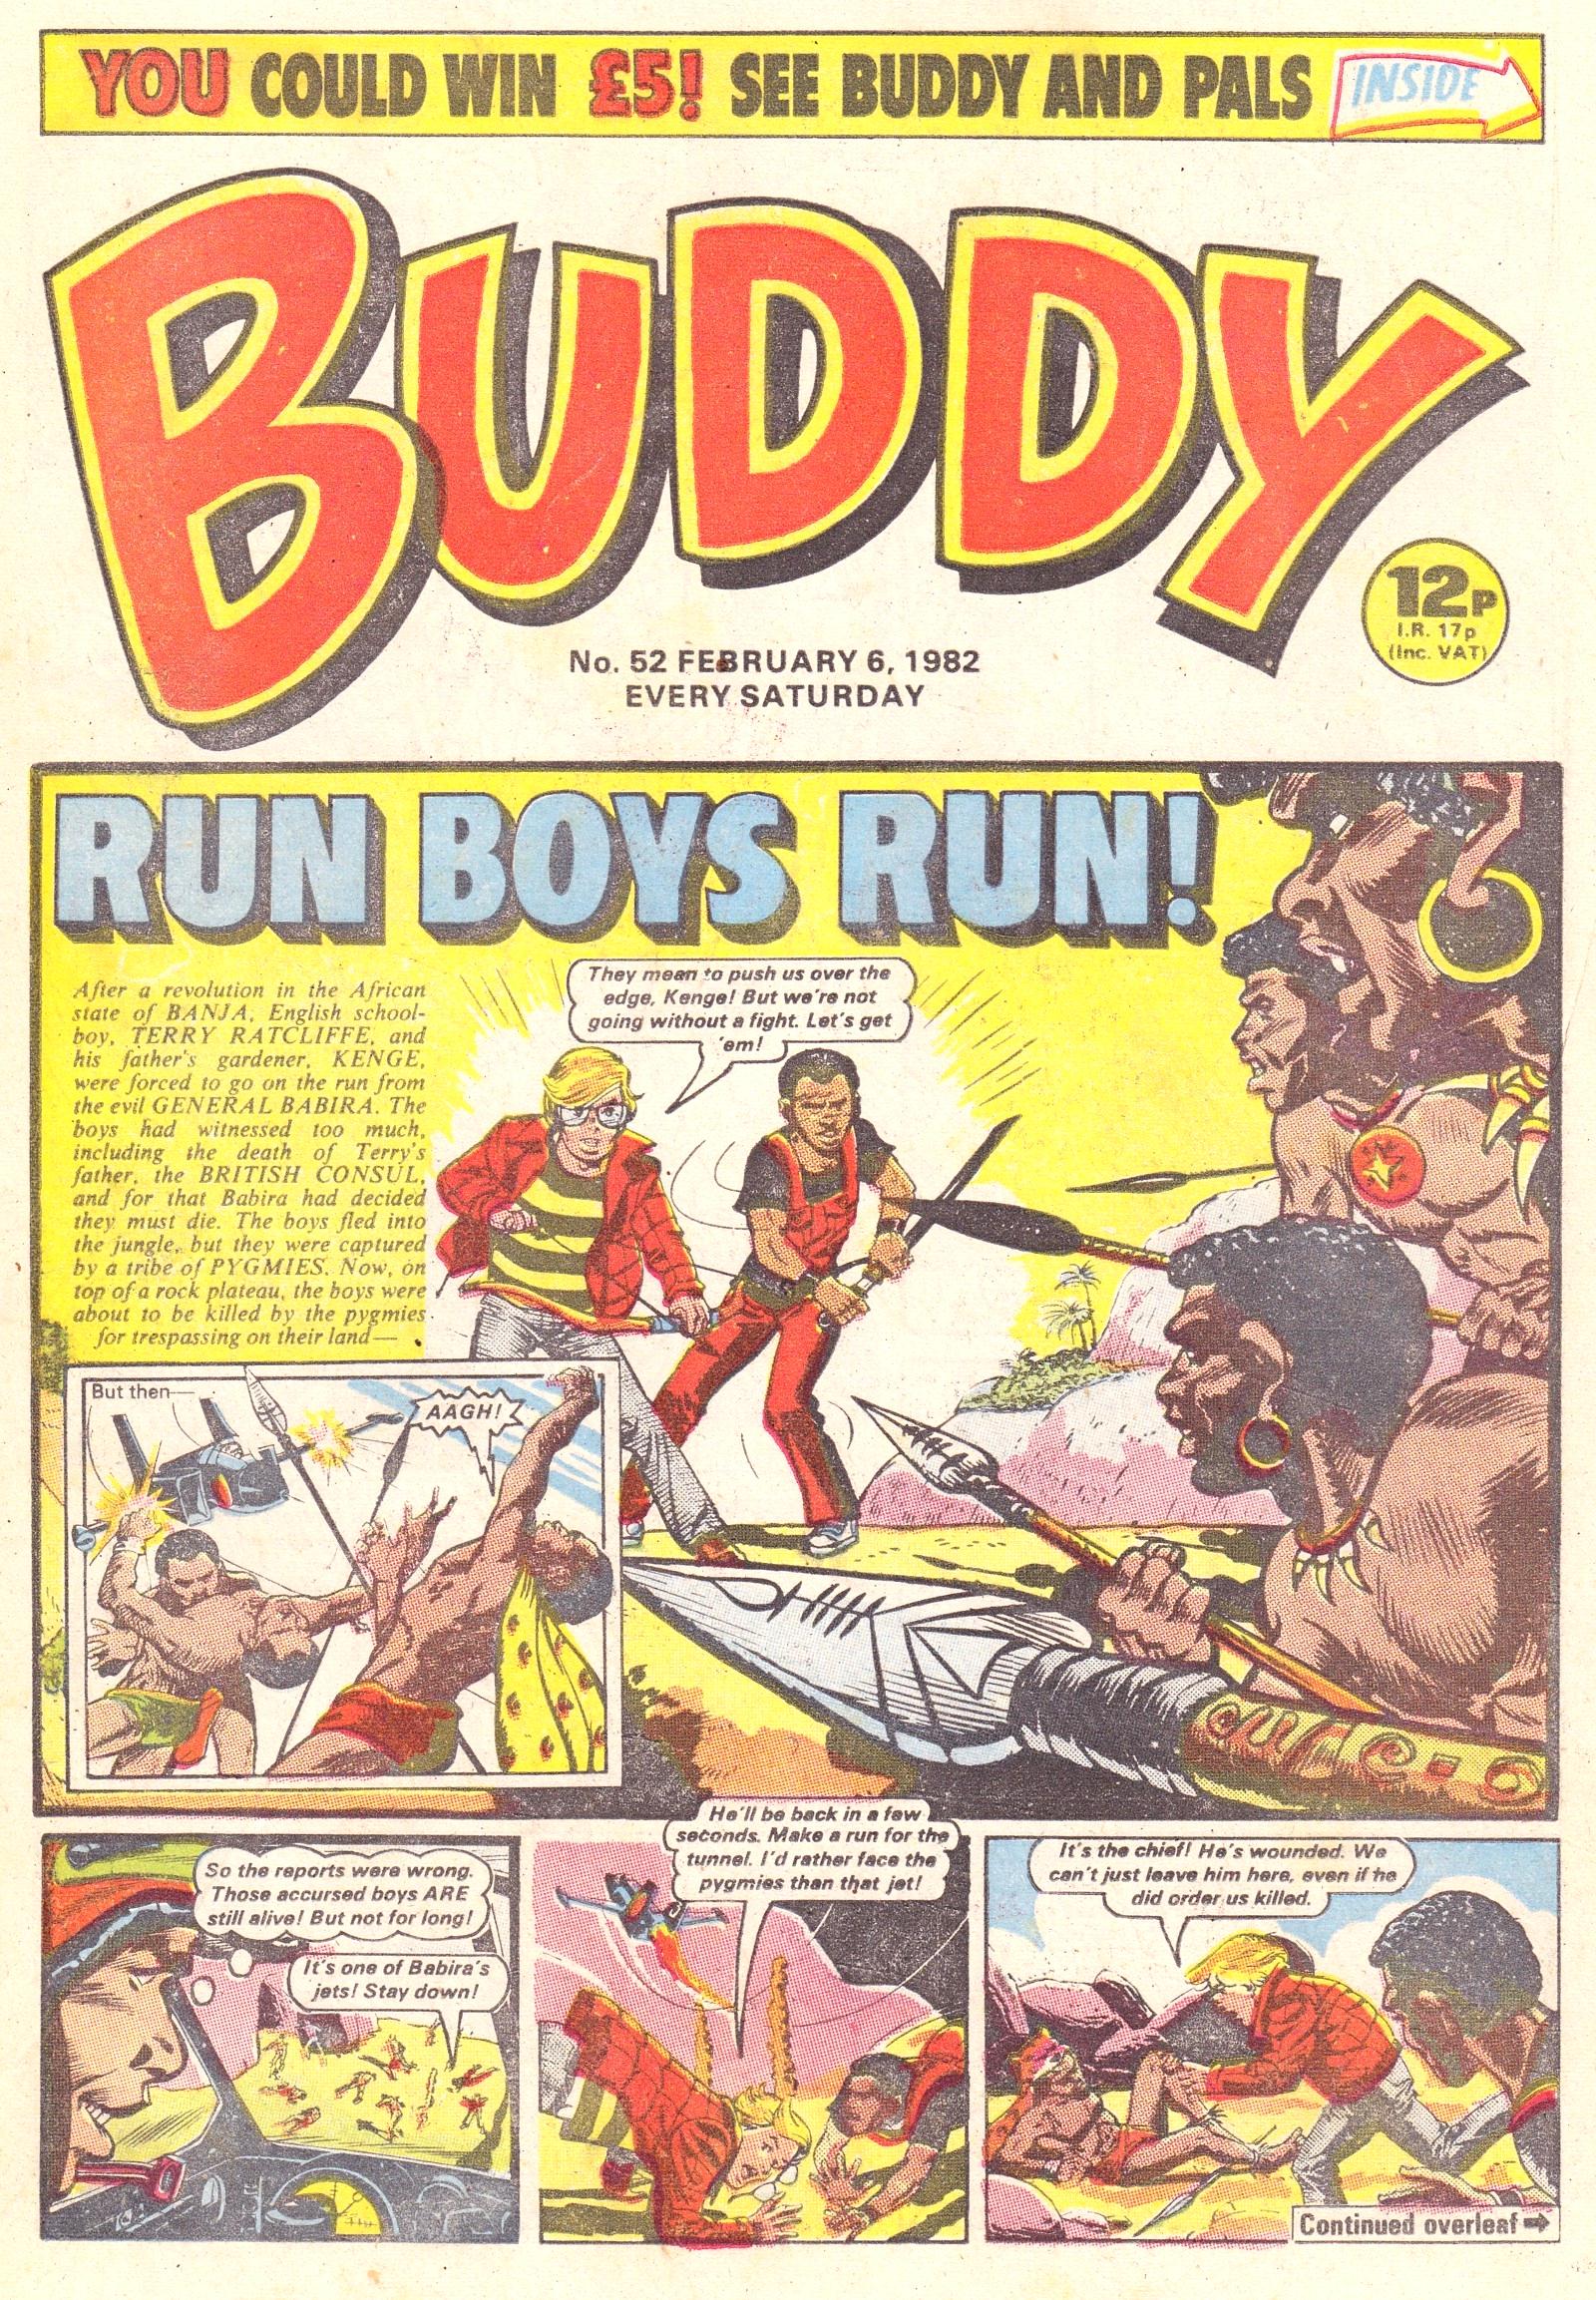 Read online Buddy comic -  Issue #52 - 1